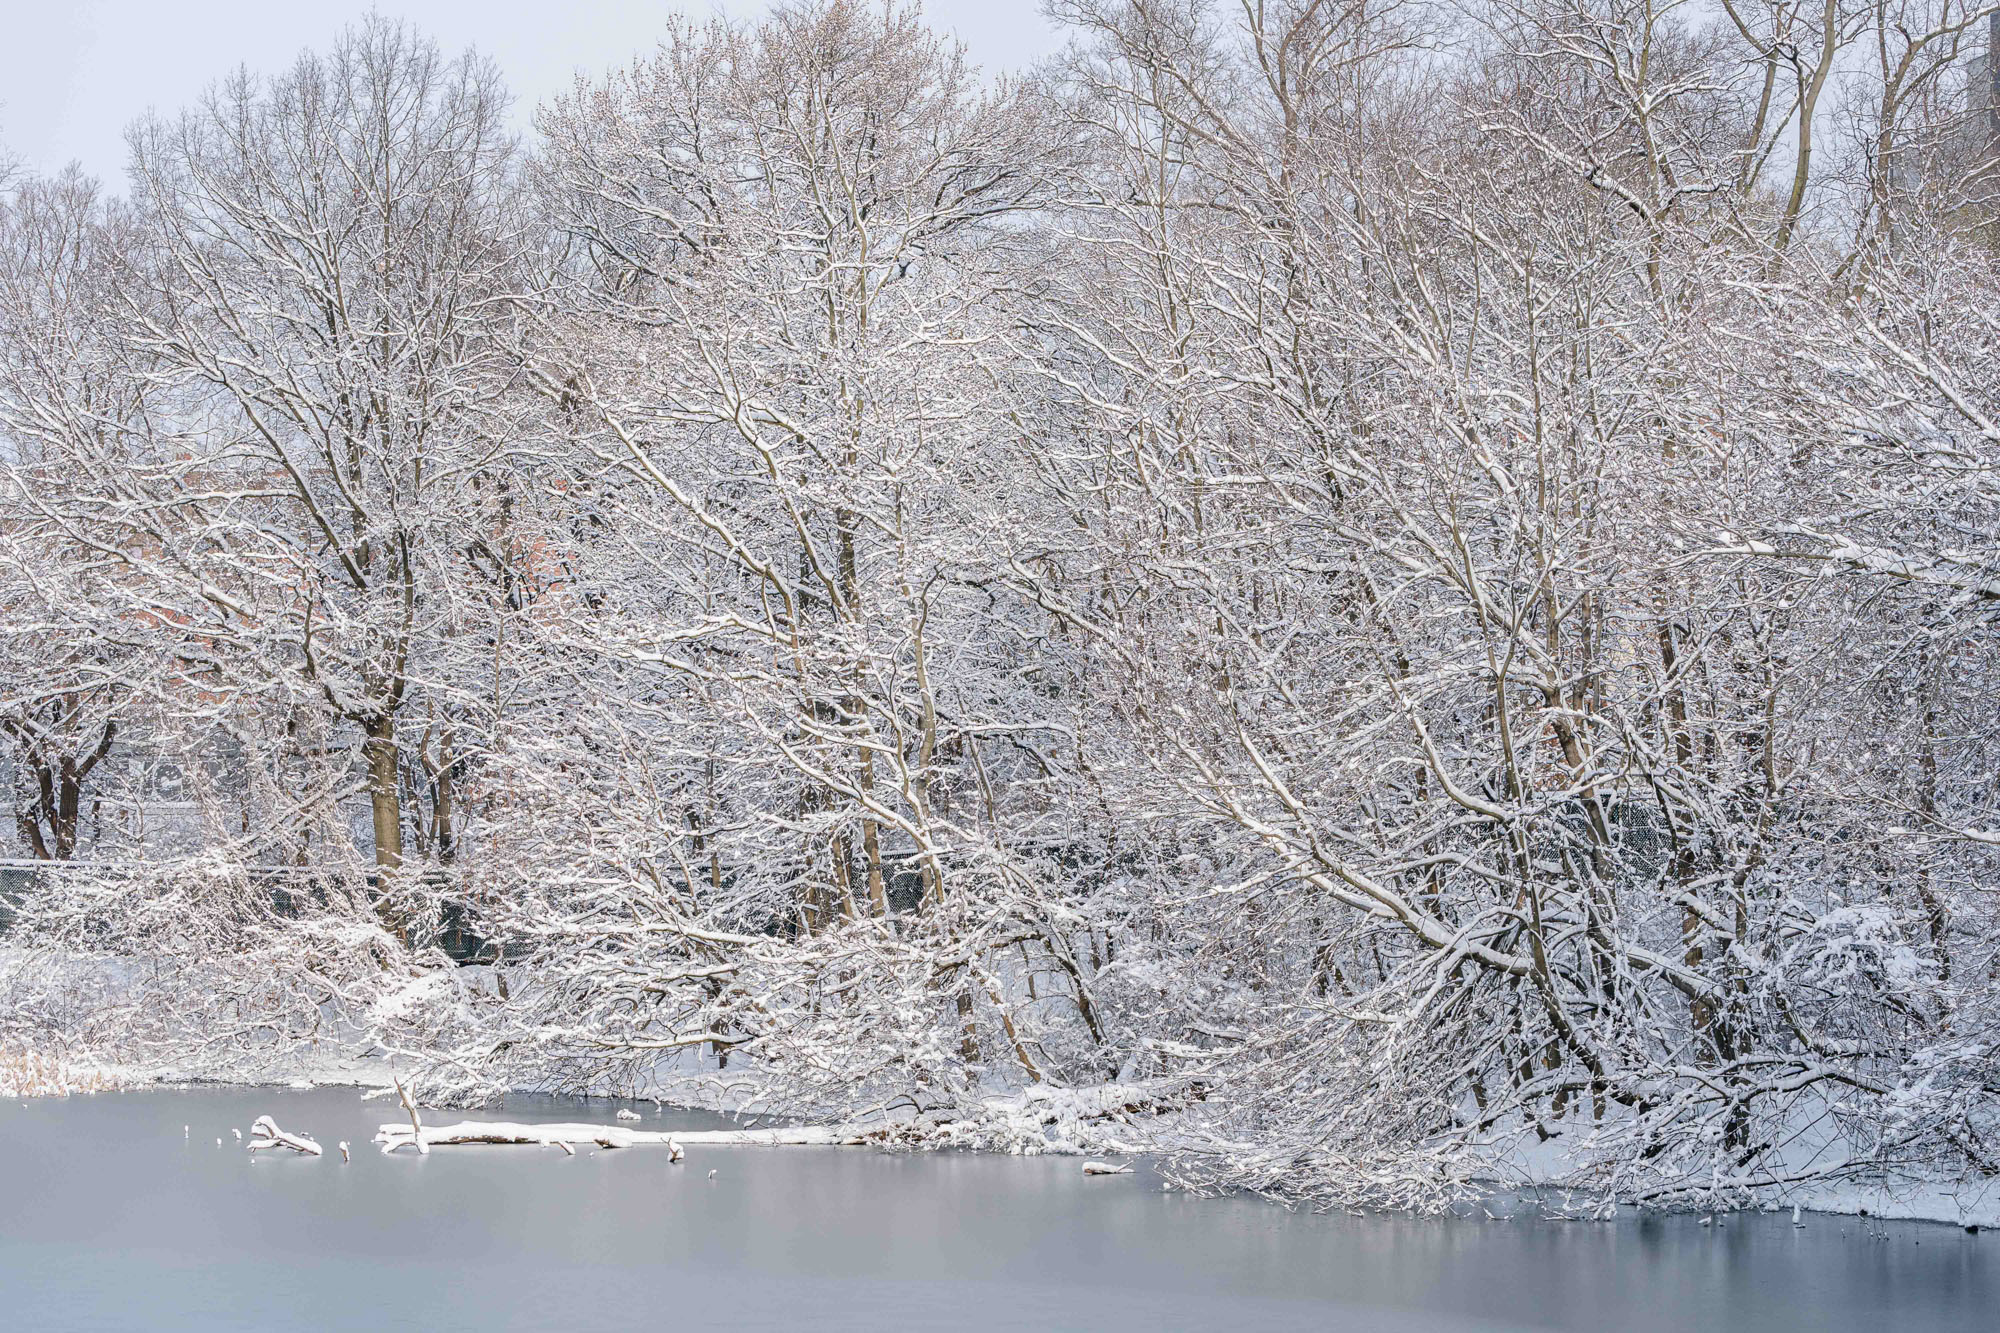 A snowy forest gleams along the banks of an icy river